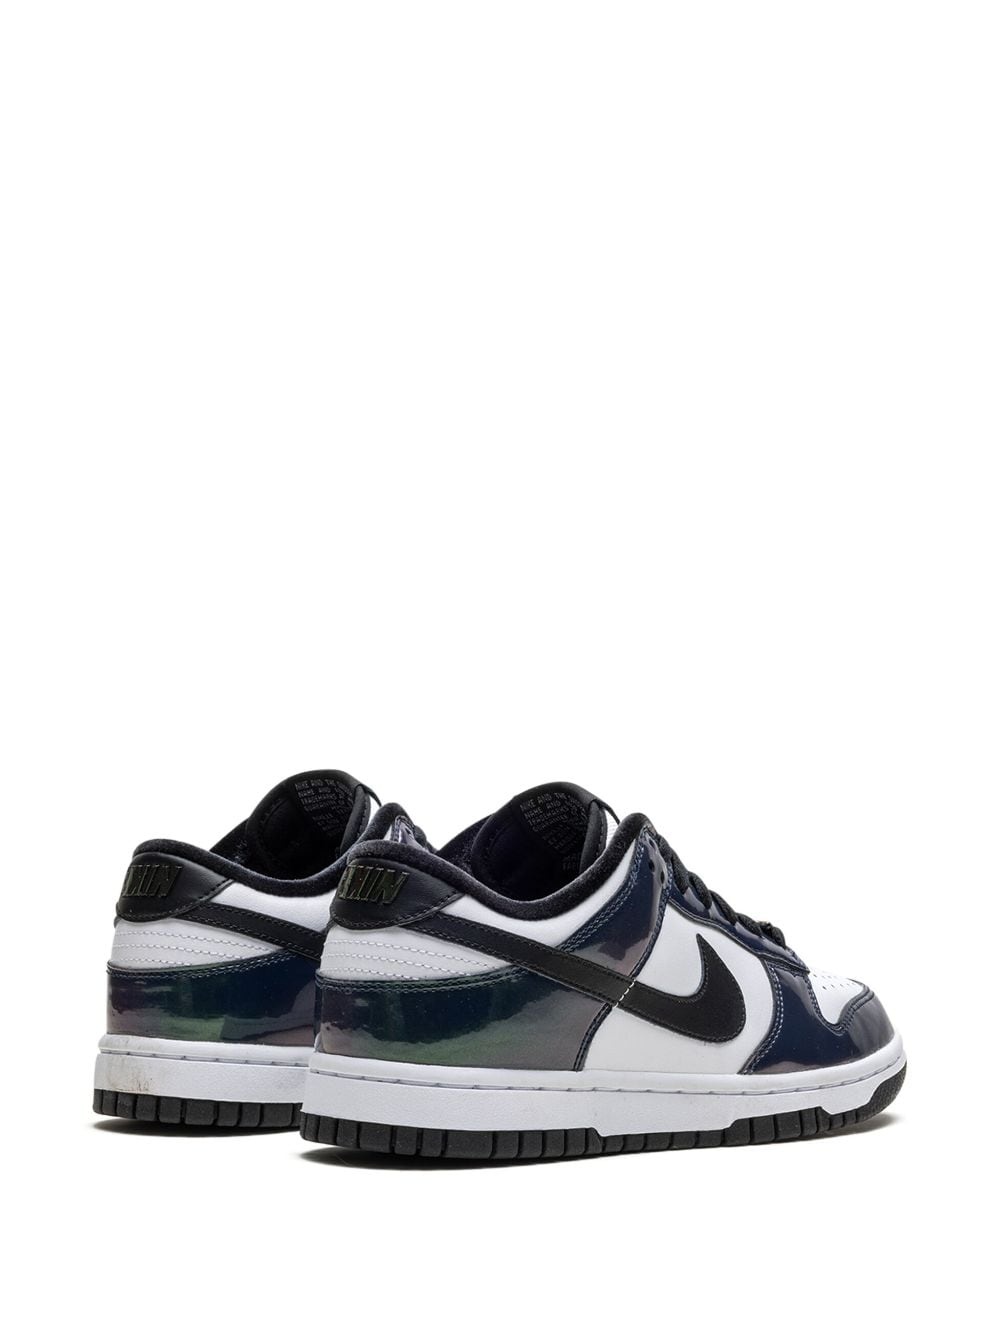 Dunk Low SE "Just Do It Iridescent" sneakers - 3